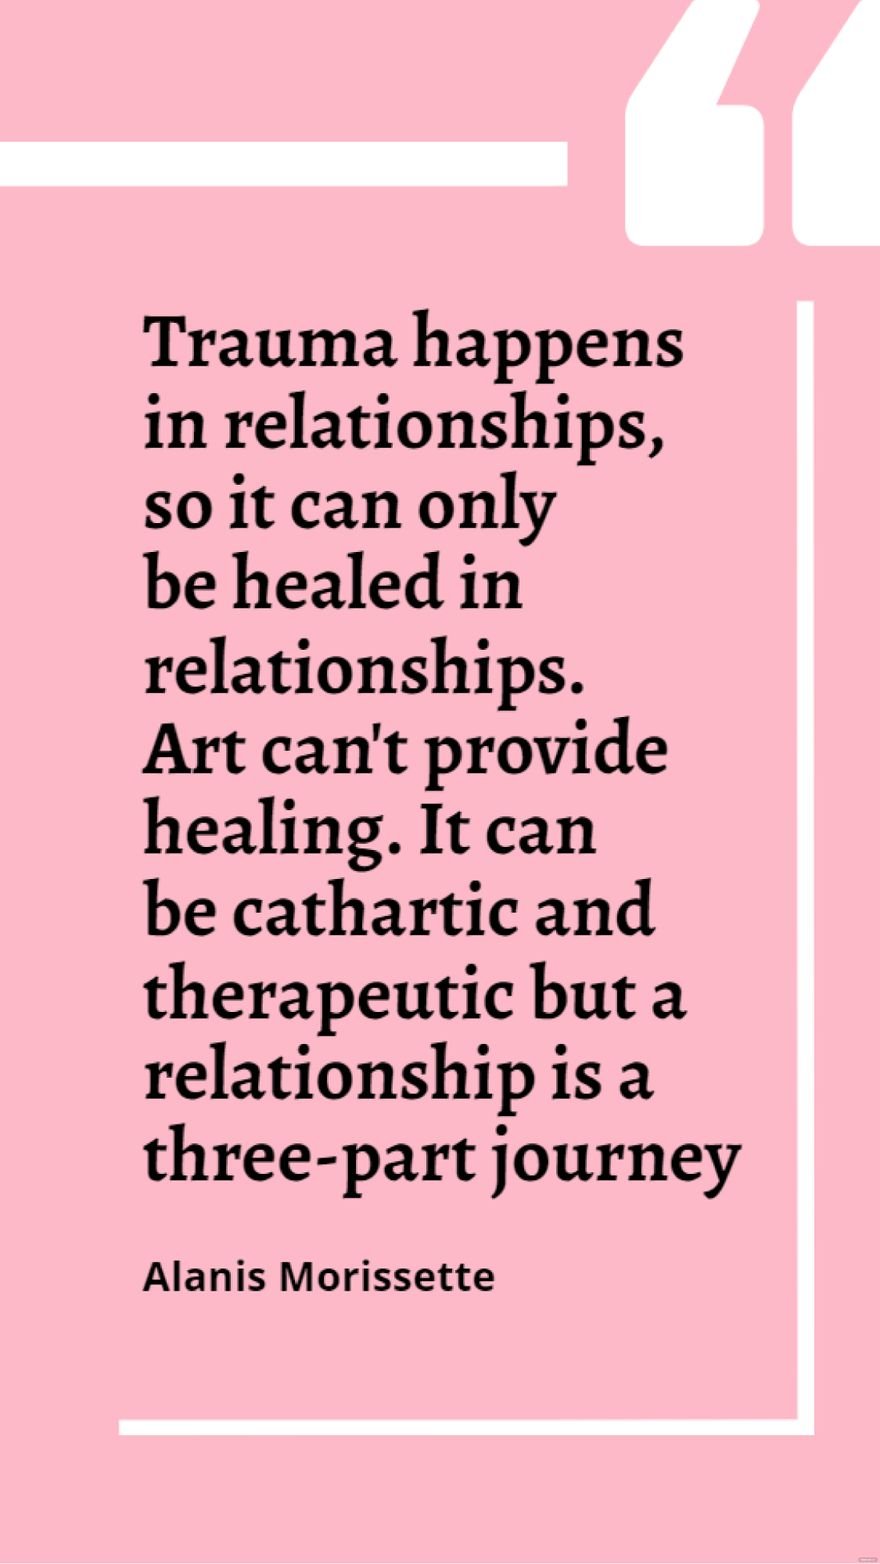 Alanis Morissette - Trauma happens in relationships, so it can only be healed in relationships. Art can't provide healing. It can be cathartic and therapeutic but a relationship is a three-part journe